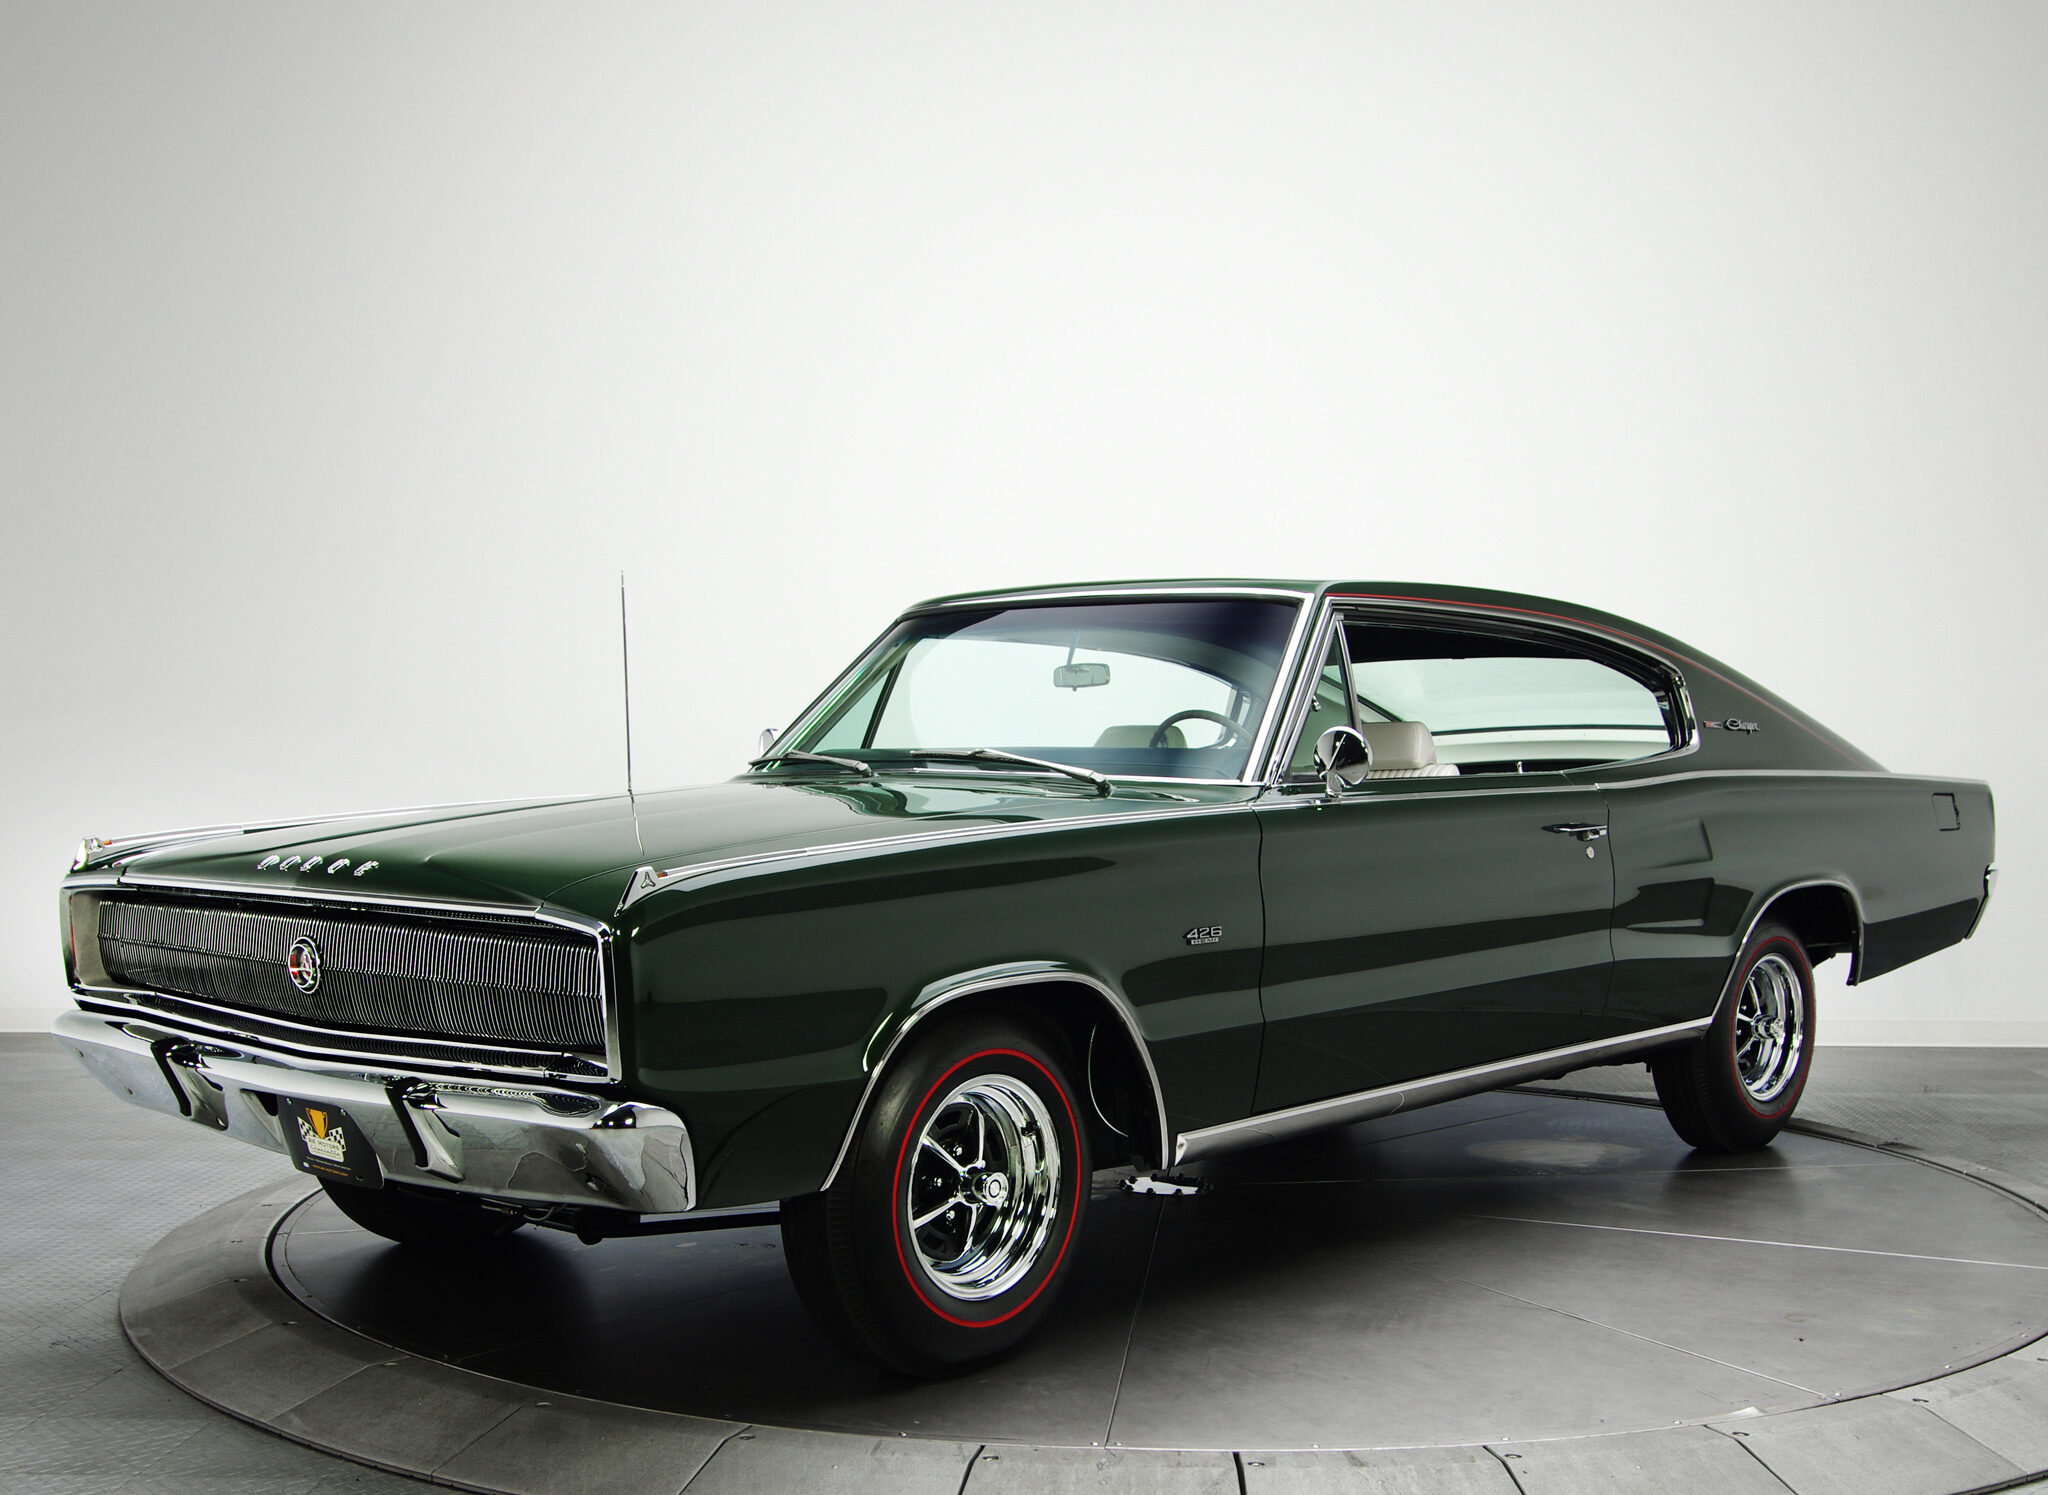 1967 Dodge Charger R/T 426 Hemi Wallpapers | SuperCars.net